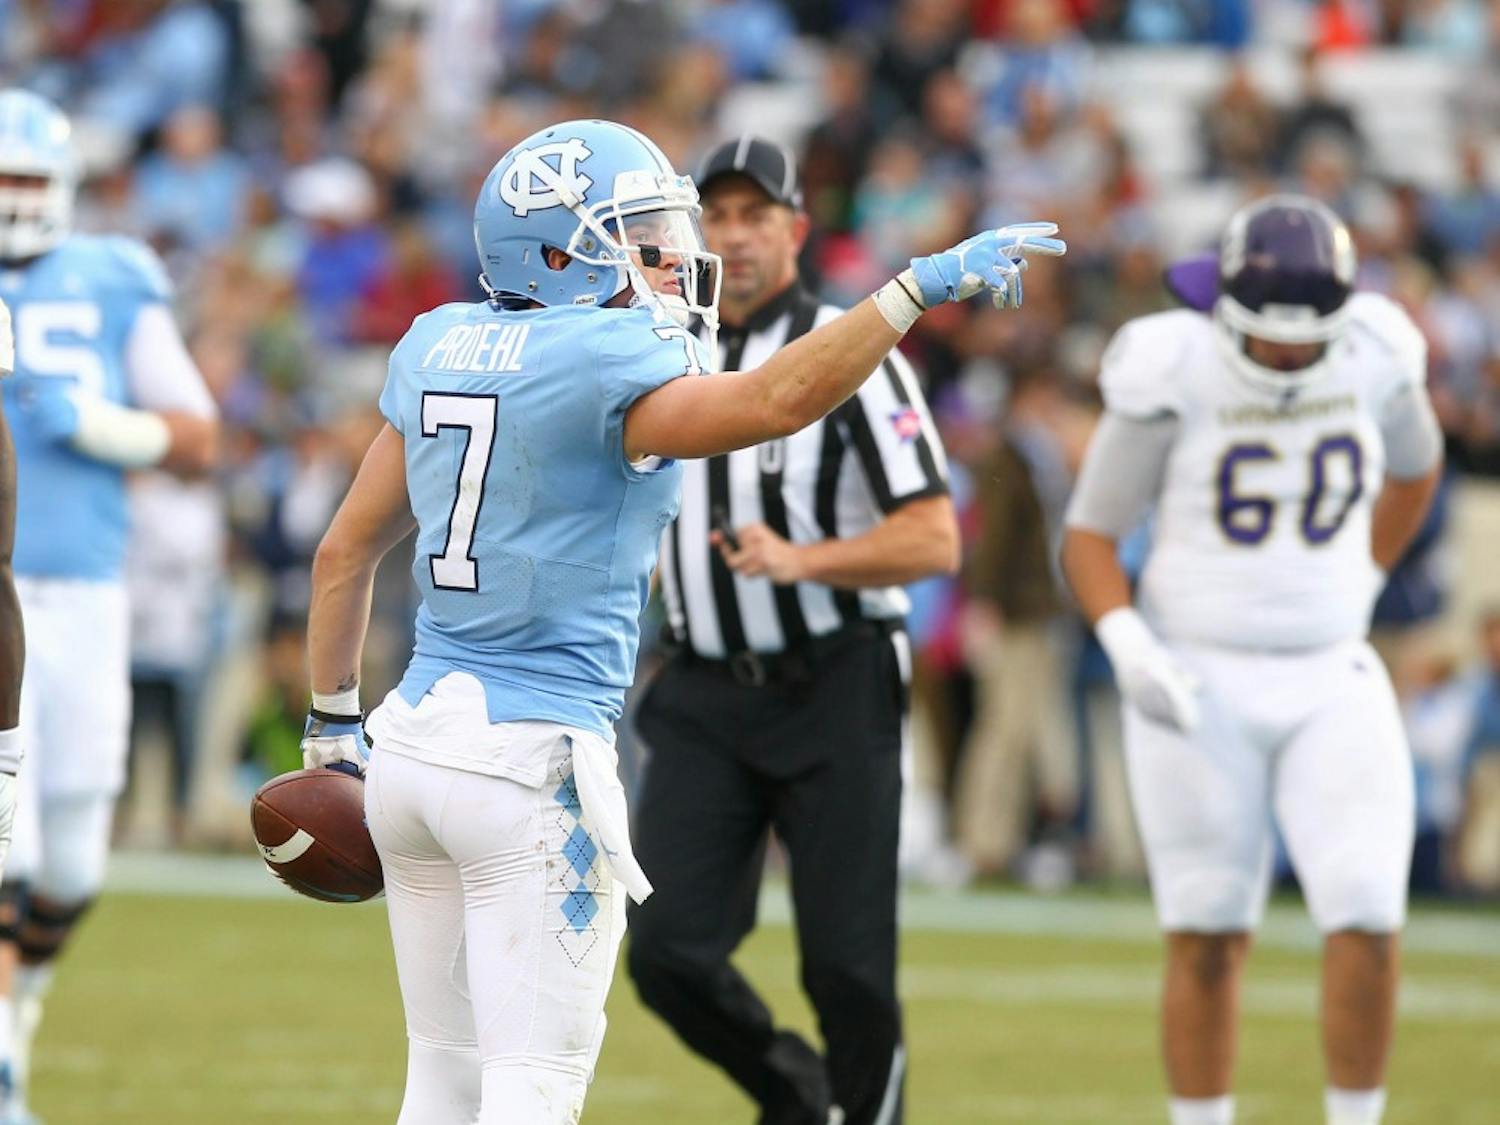 With a 65-10 win over in-state opponent Western Carolina, the North Carolina football team moved to 3-8 on the season. It was UNC's only home win of the season. Quarterback Nathan Elliott threw four touchdown passes, and UNC scored five touchdowns in the second quarter.